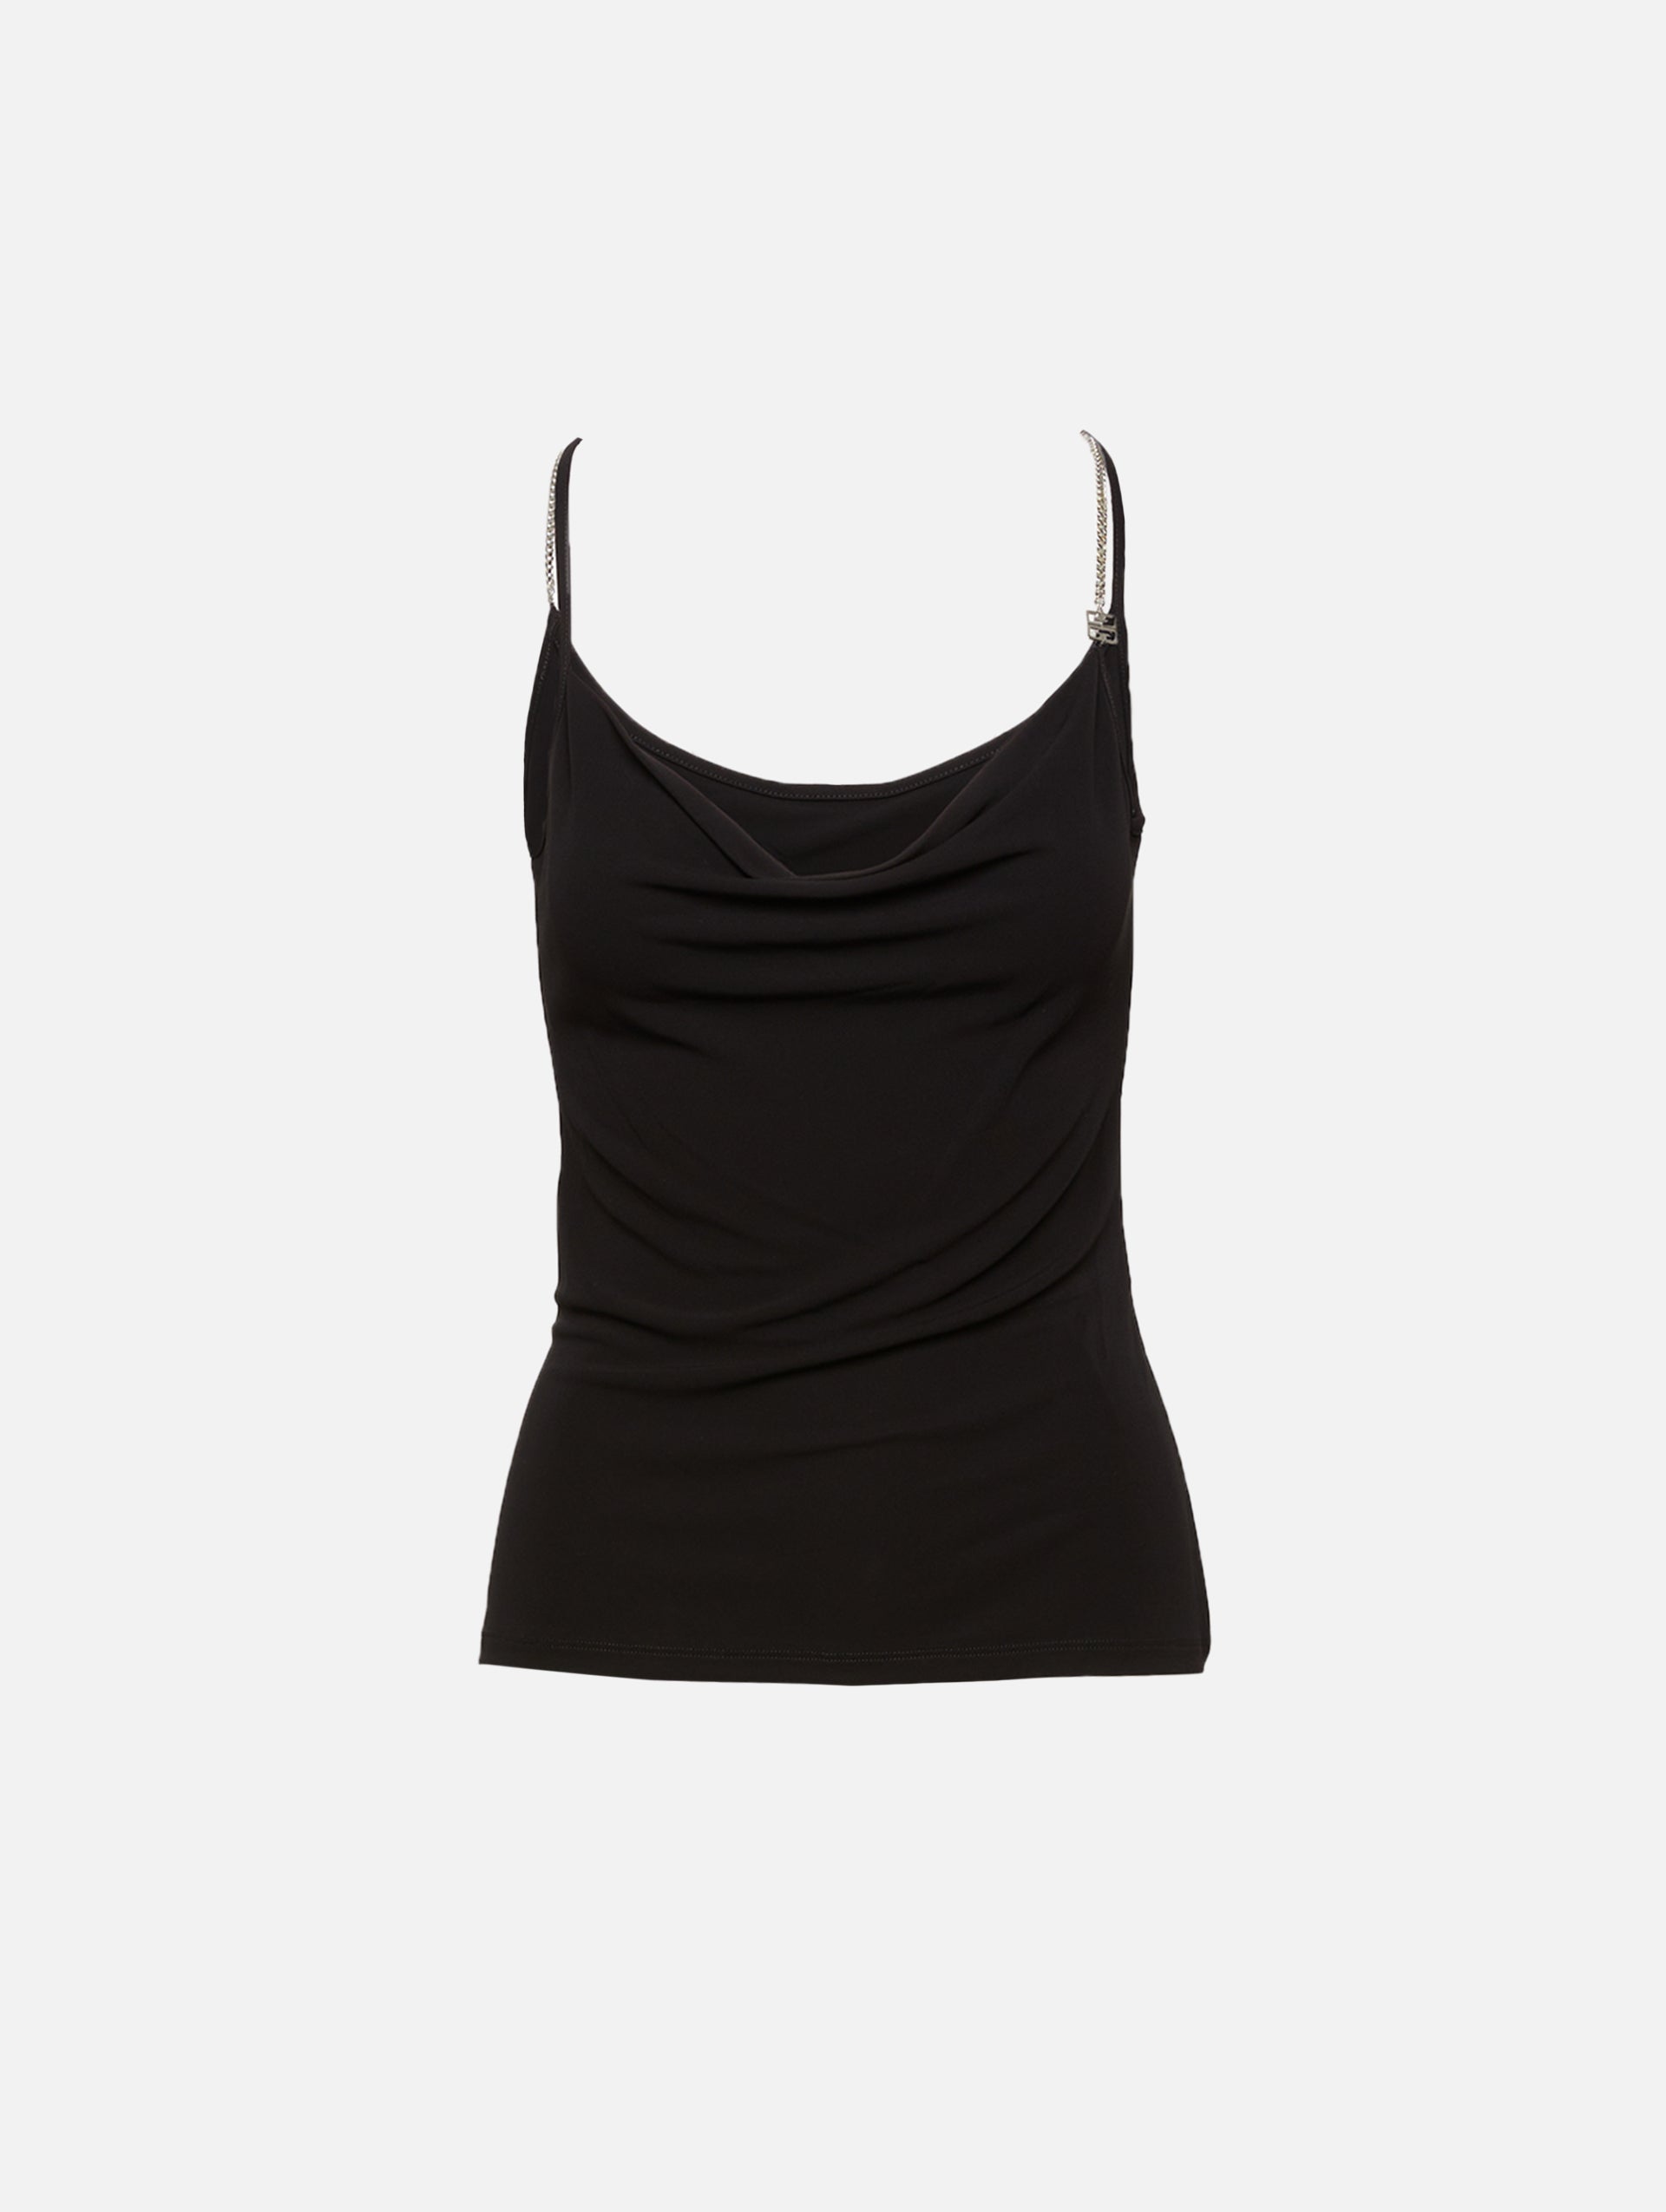 Givenchy Black Crossed Camisole